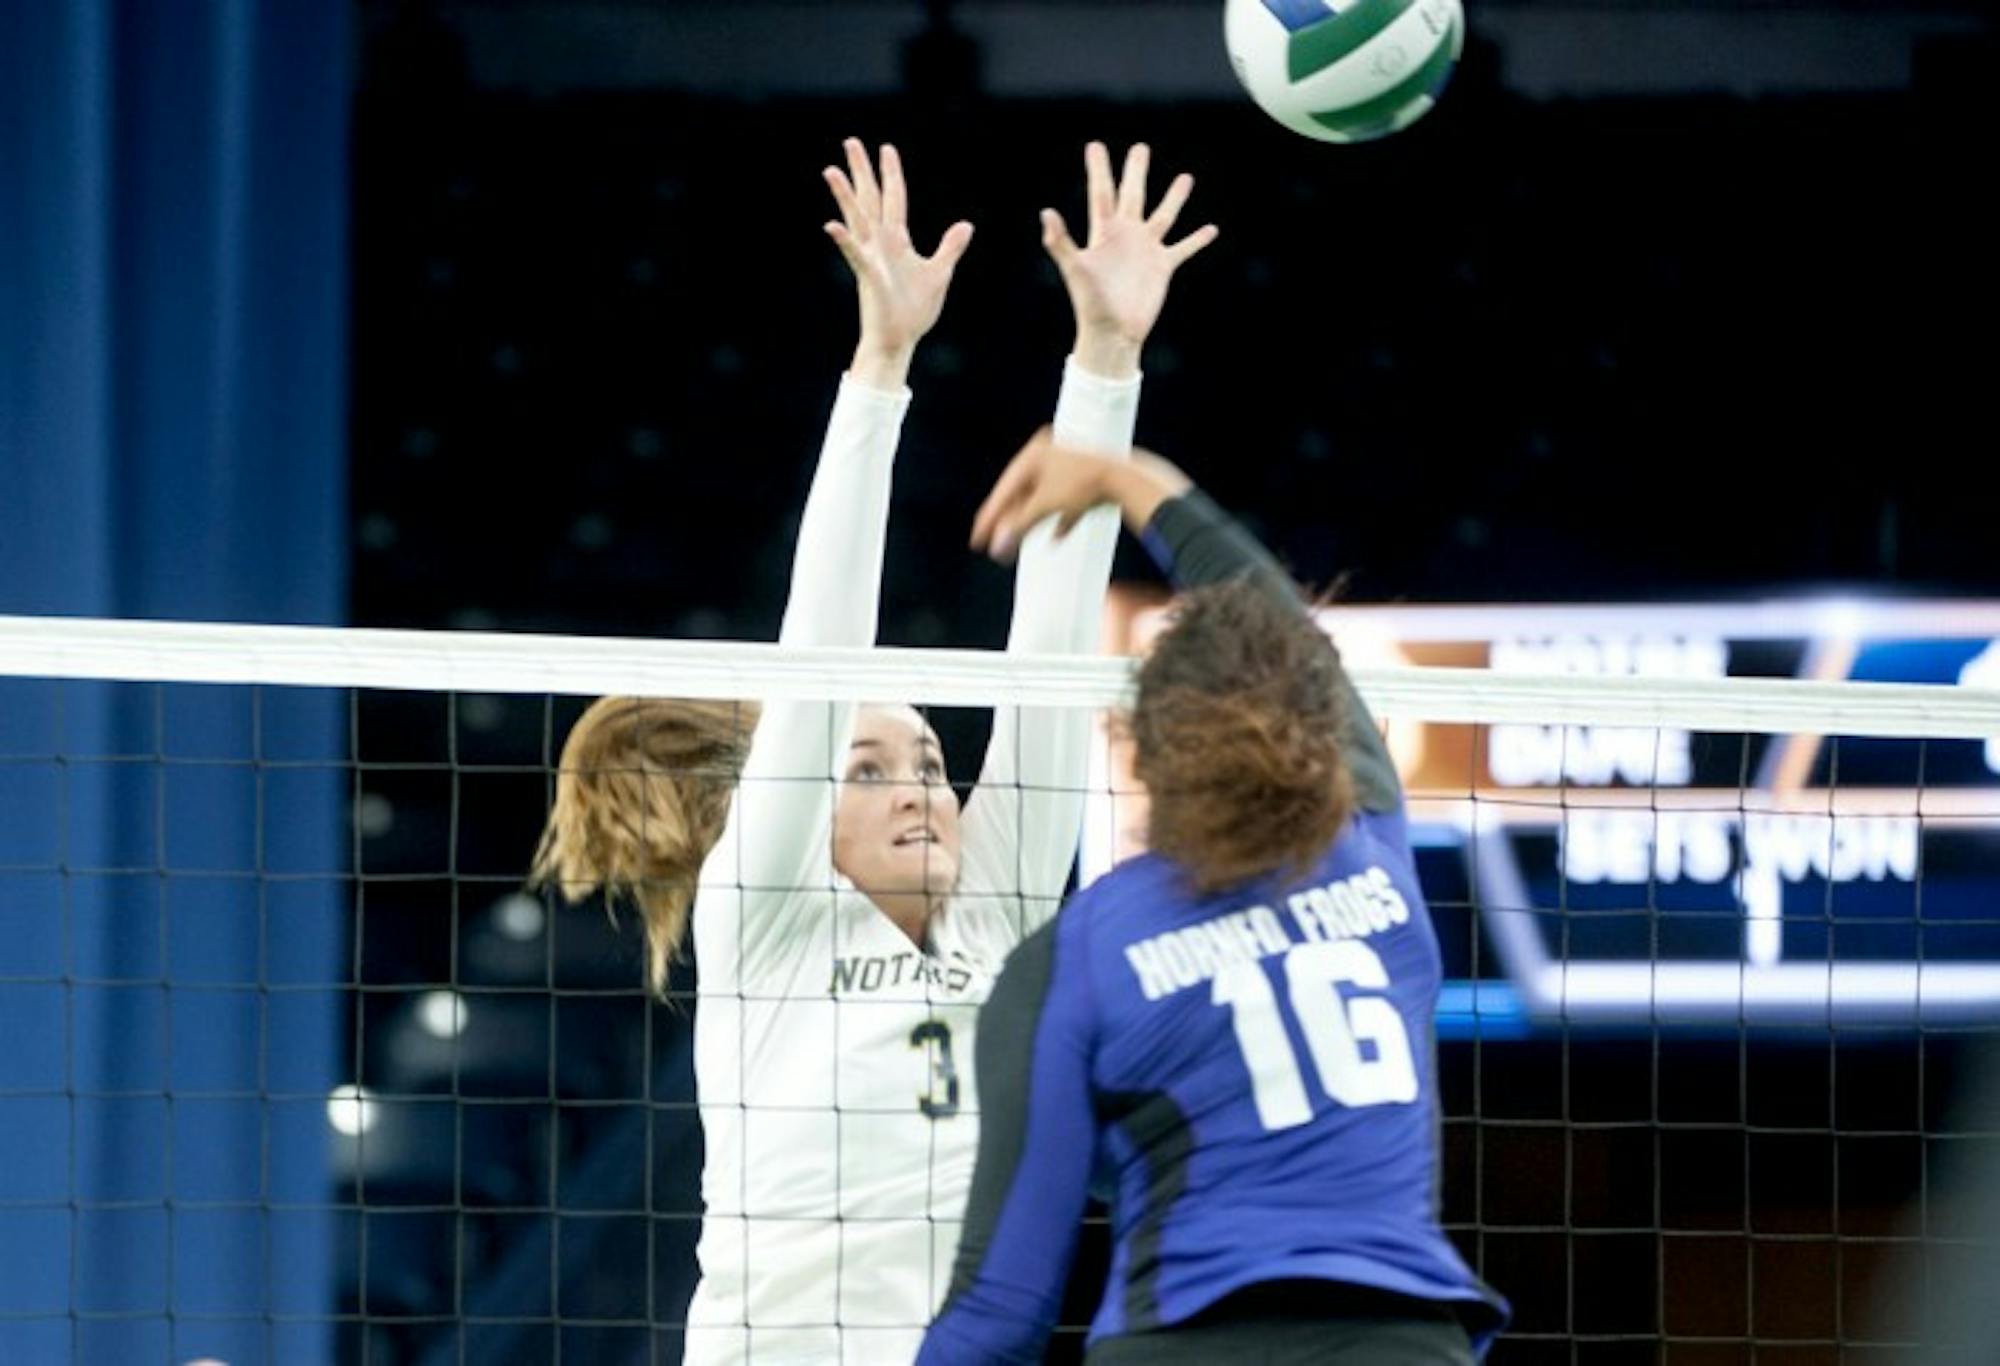 Irish freshman middle blocker Sam Fry leaps up for a block in Notre Dame’s 3-1 loss to TCU on Sept. 19 at Purcell Pavilion.